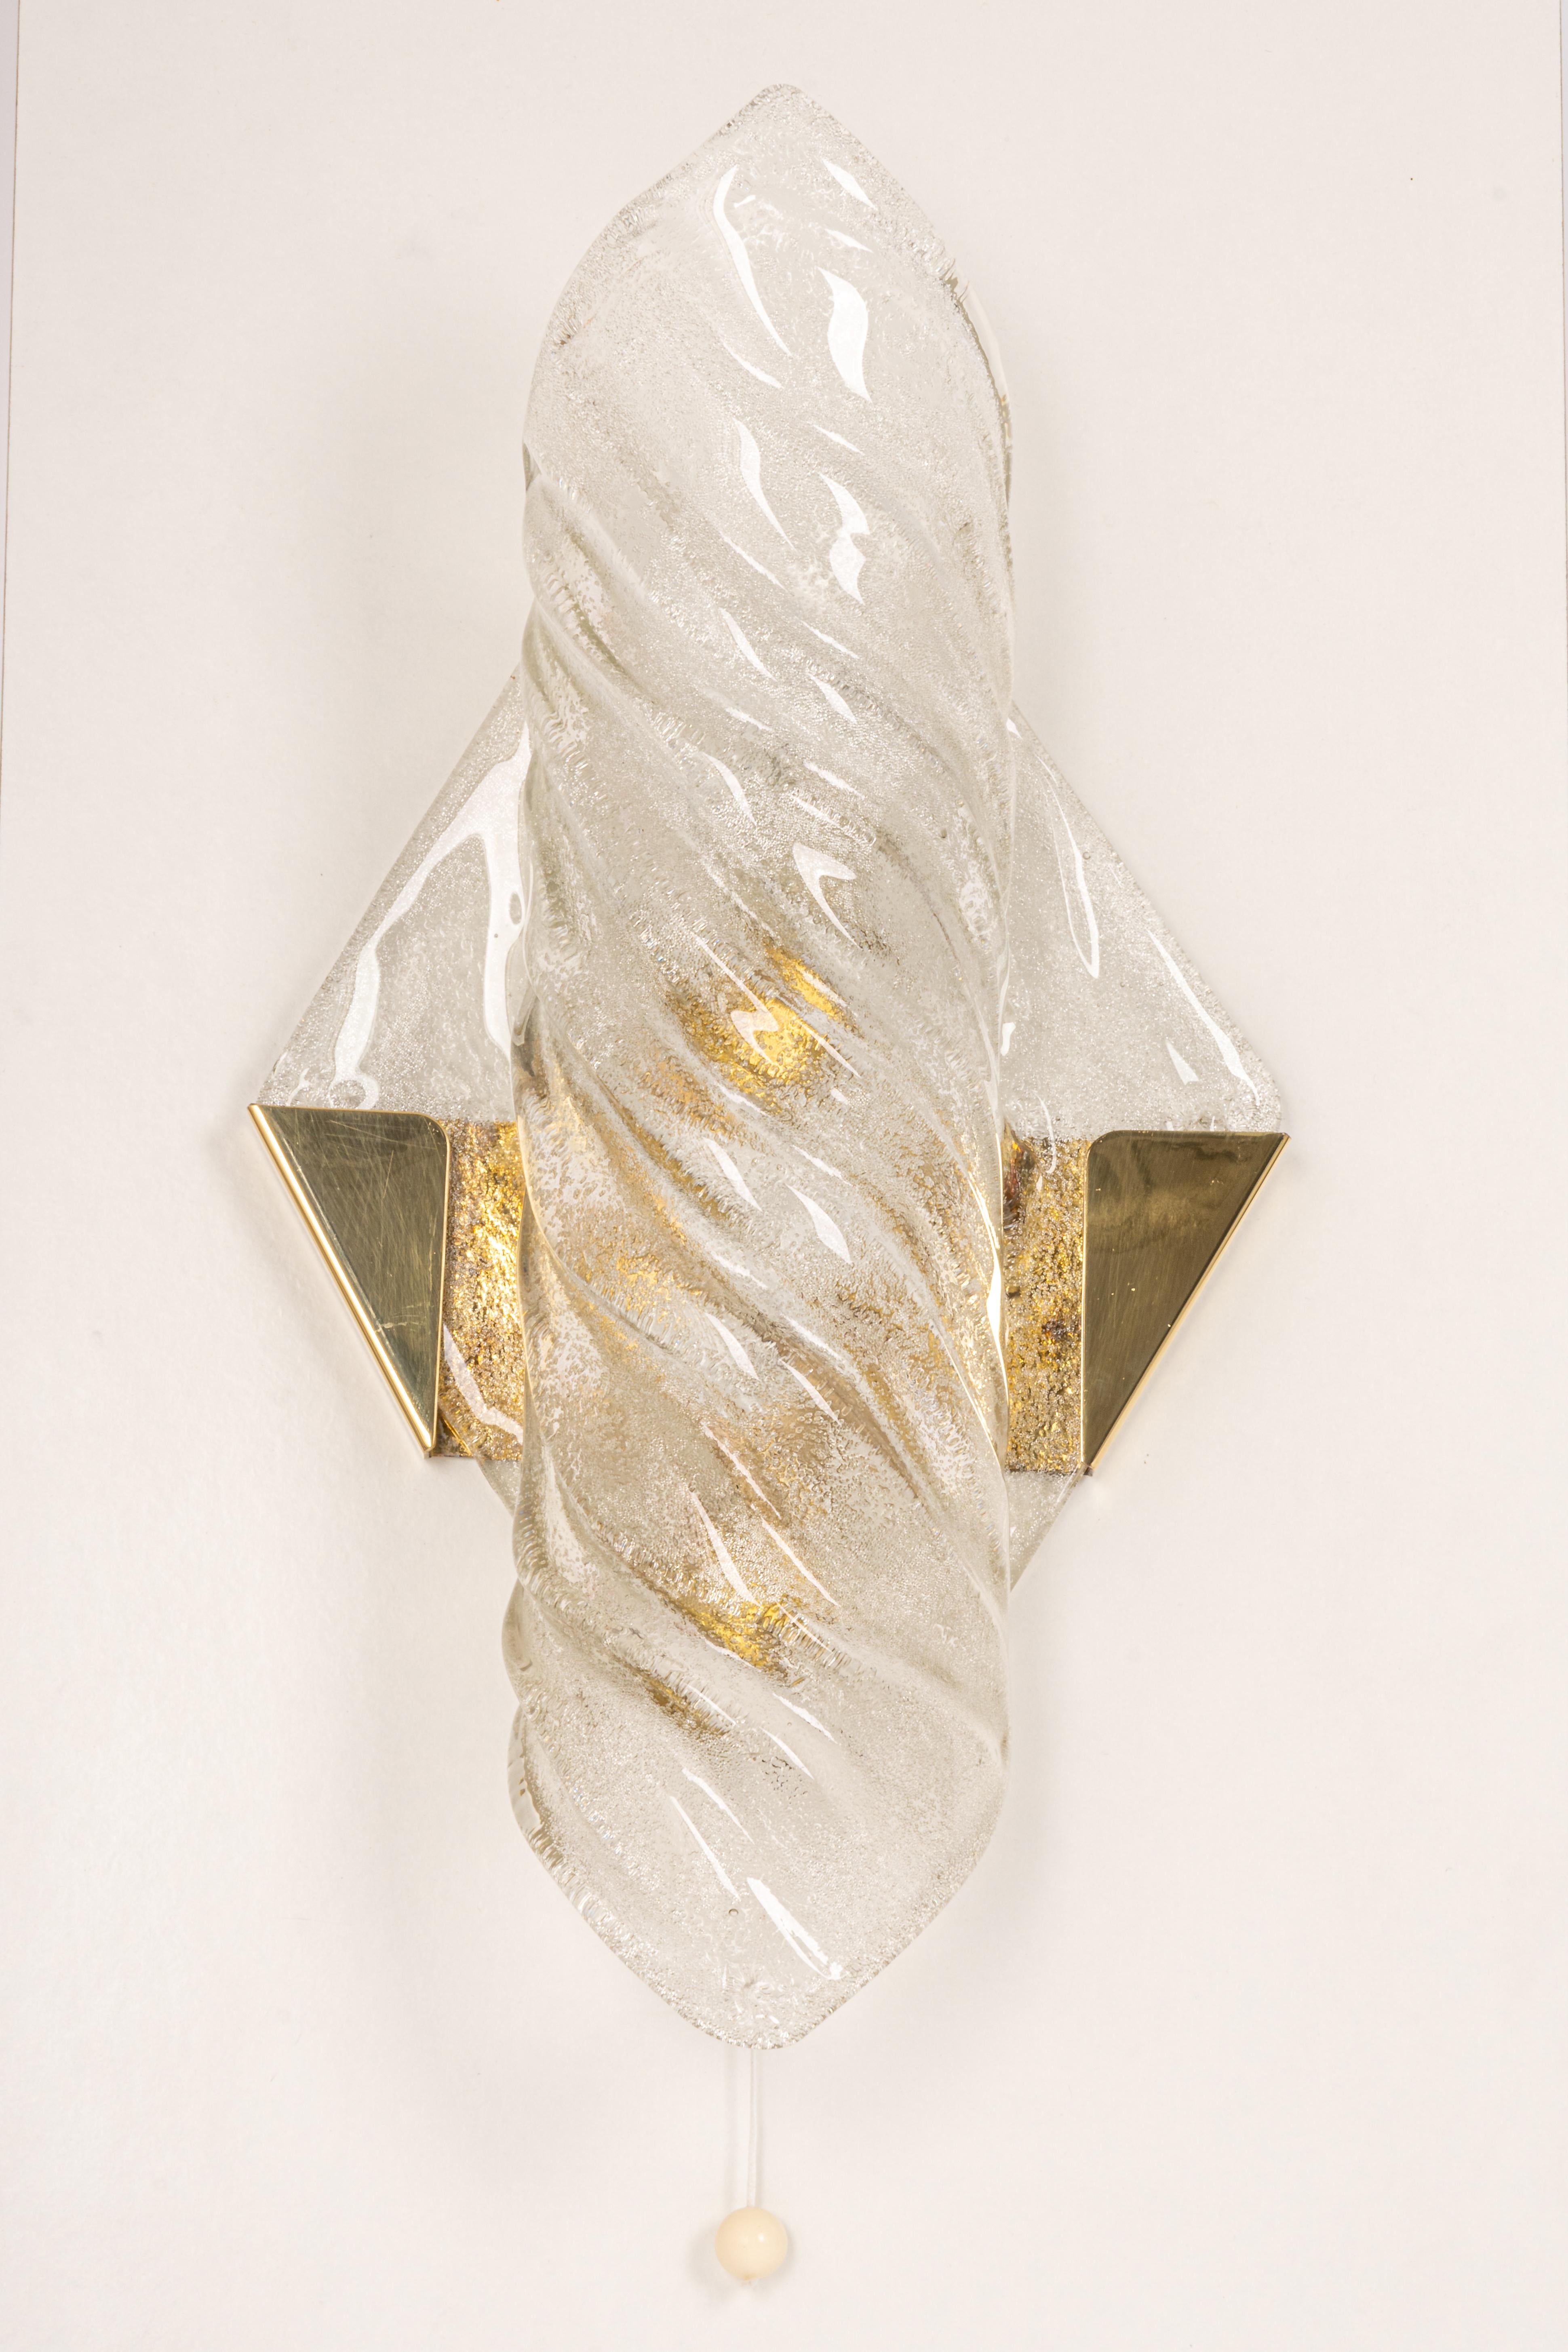 Pair of Large Vanity Angular Murano Glass Sconces by Hillebrand, Germany, 1960s For Sale 3